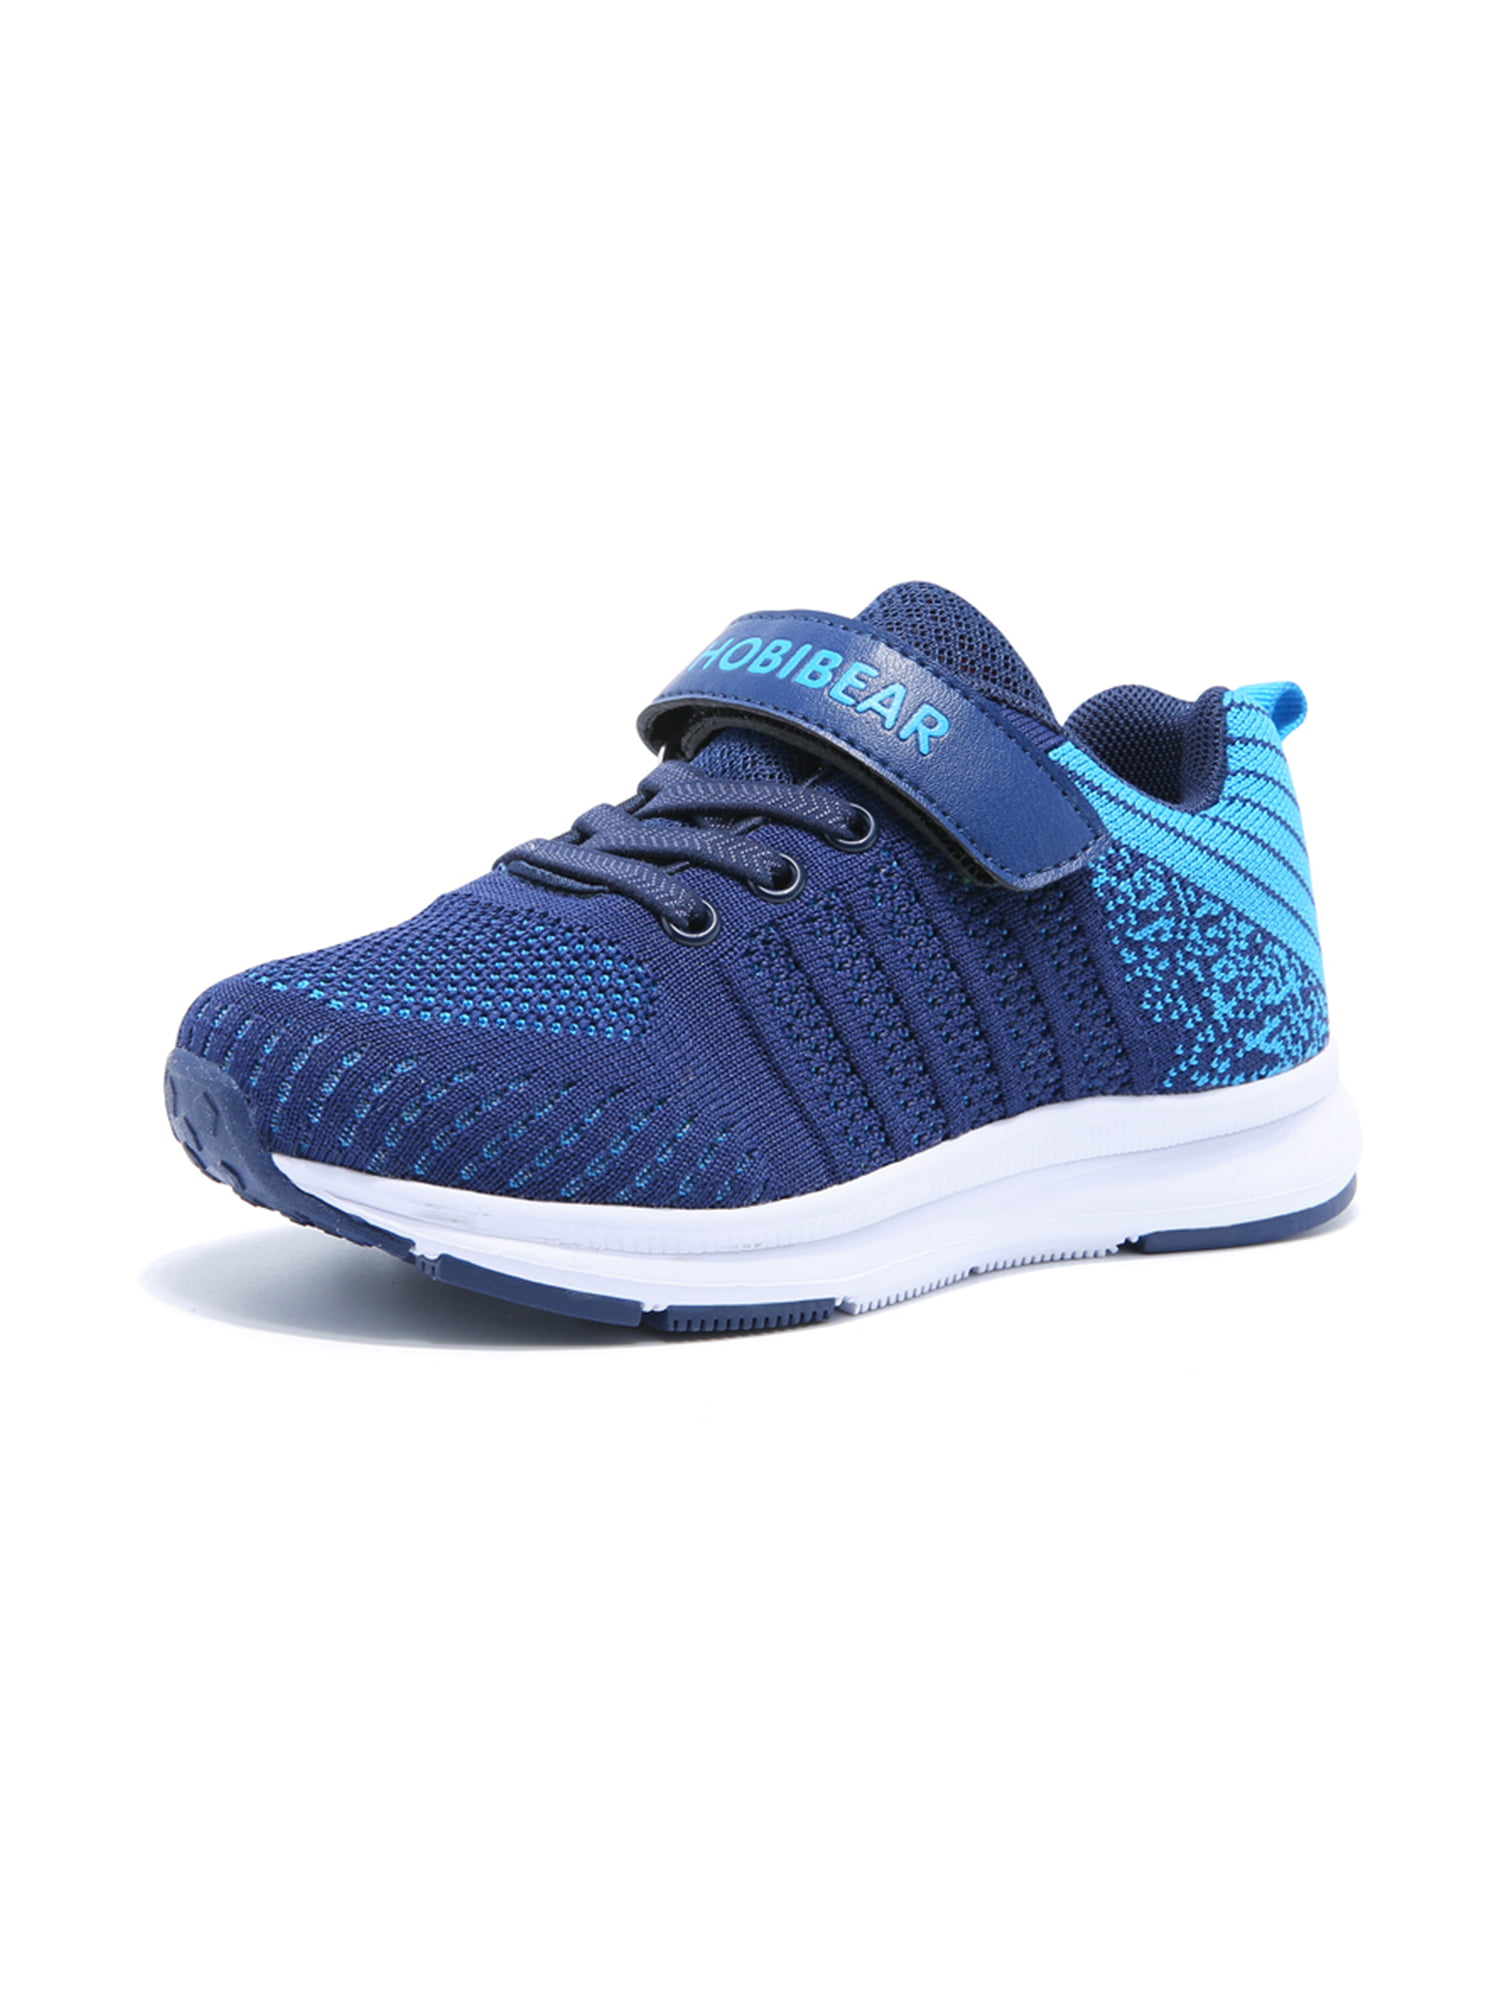 Kids' Sports Shoes Athletic Lightweight 